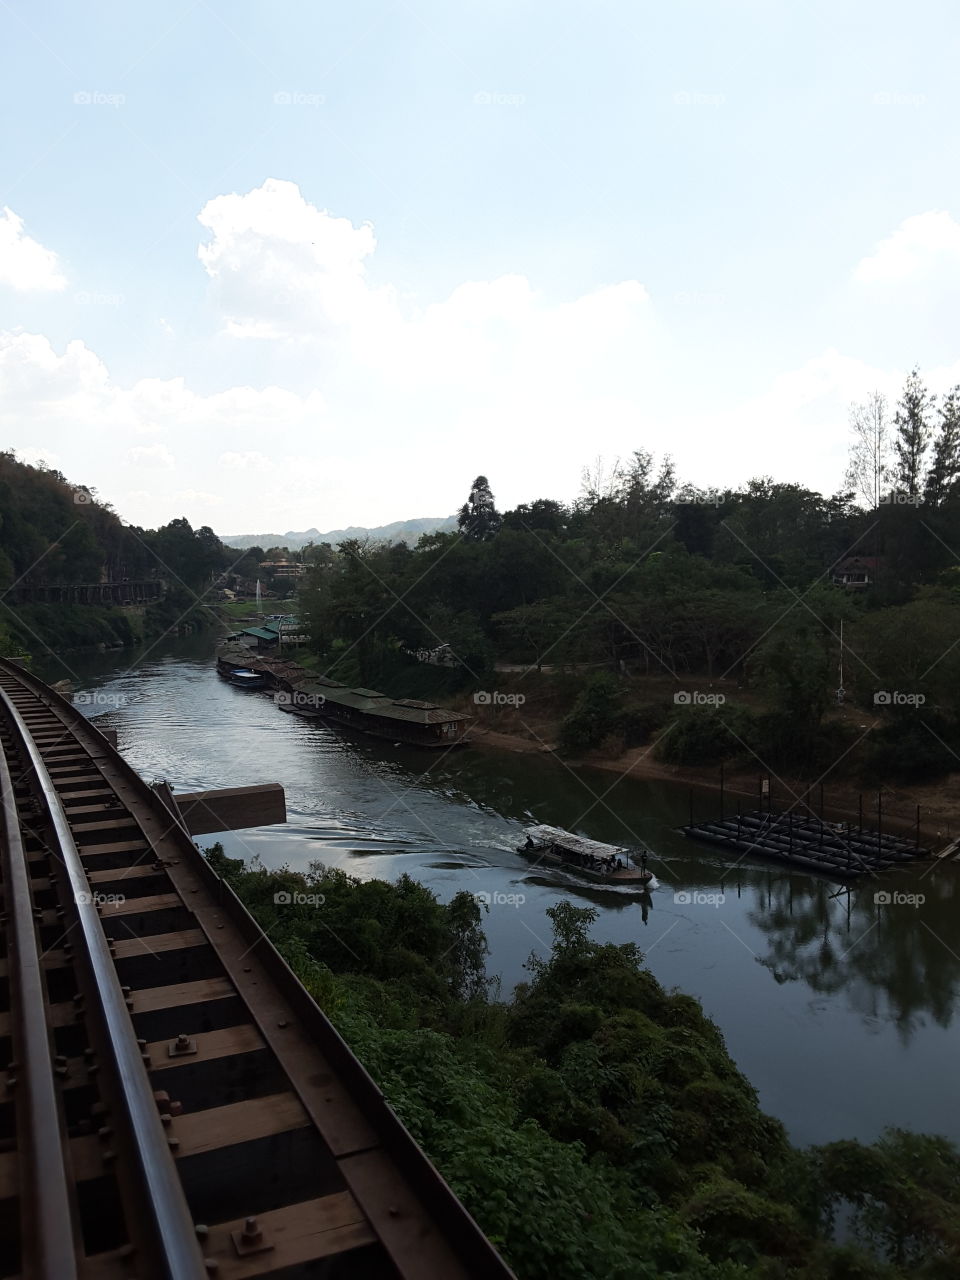 The Death Railway was built during the Second World War by Allied prisoners of war and Allied war workers. The Japanese army has been drafted to serve as a strategic route through Burma. Nowadays, this route to the end of the destination at Ban Tha Sao or the station. Waterfall Distance from Kanchanaburi station to the waterfall is about 77 km. "If you count the pillows to support the railway. The number of people - prisoners of war who were drafted to build this railroad was dead. "This is the story of the Thai-Burma Railway, a distance of more than 415 kilometers, the brutality and hardship of prisoners of war. receive Until it was dubbed The "Death Railway"